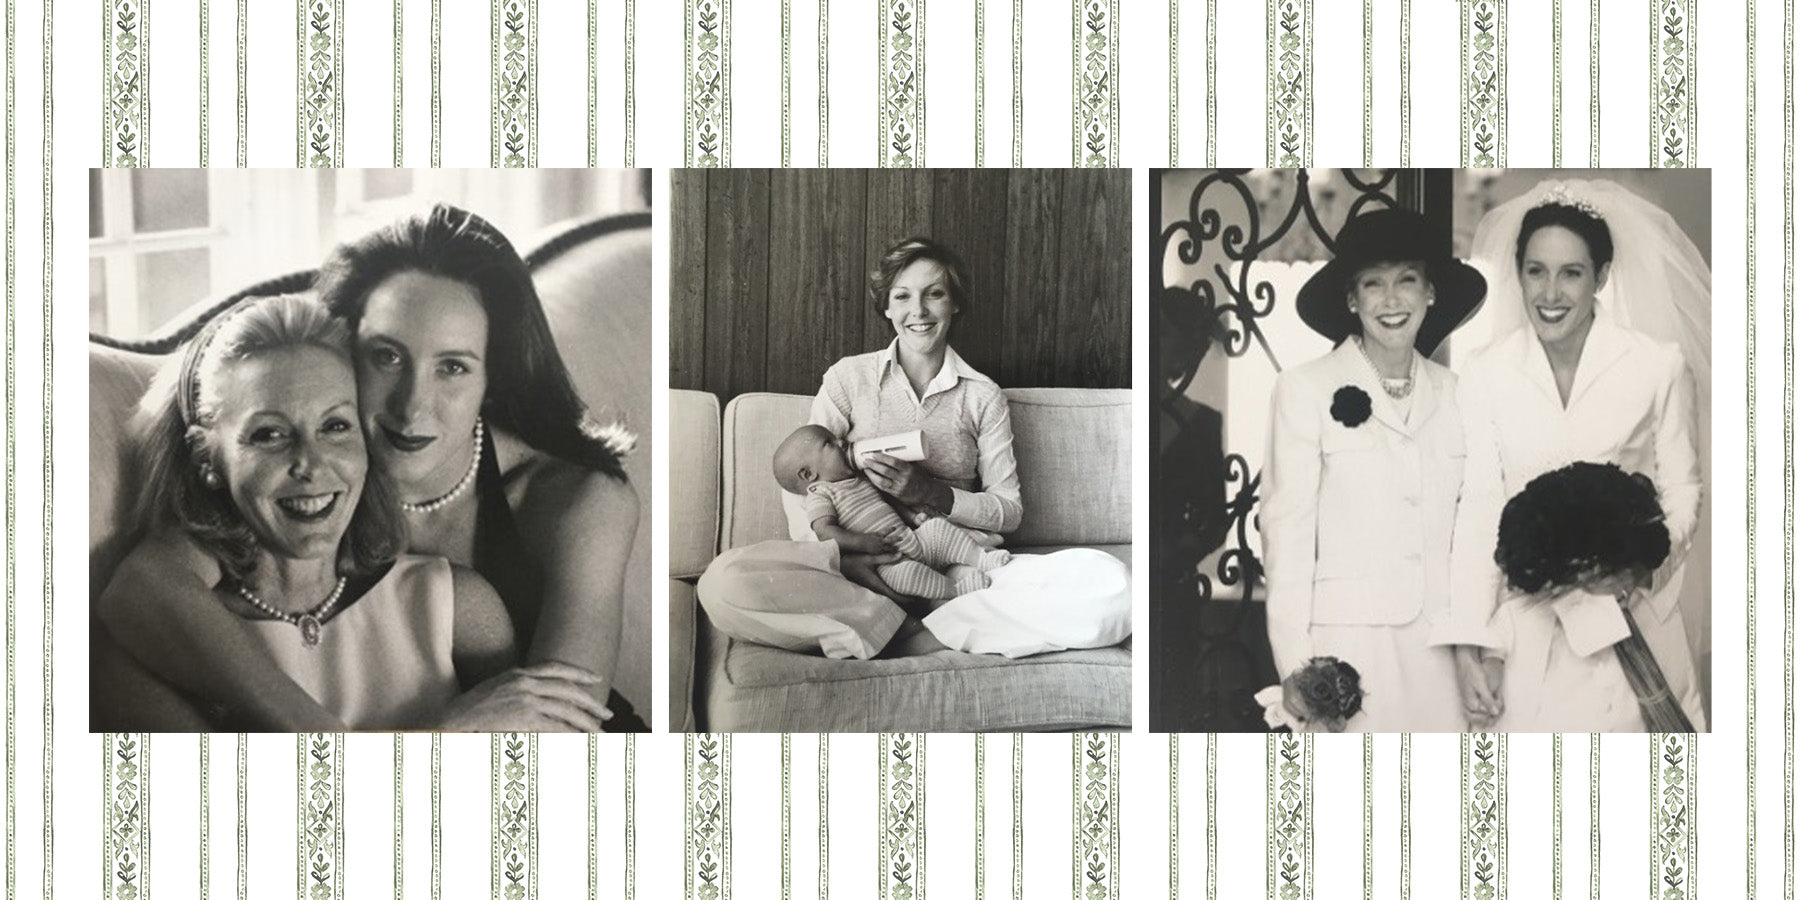 Juliska Co-Founder, Capucine De Wulf Gooding and her mother through the years.